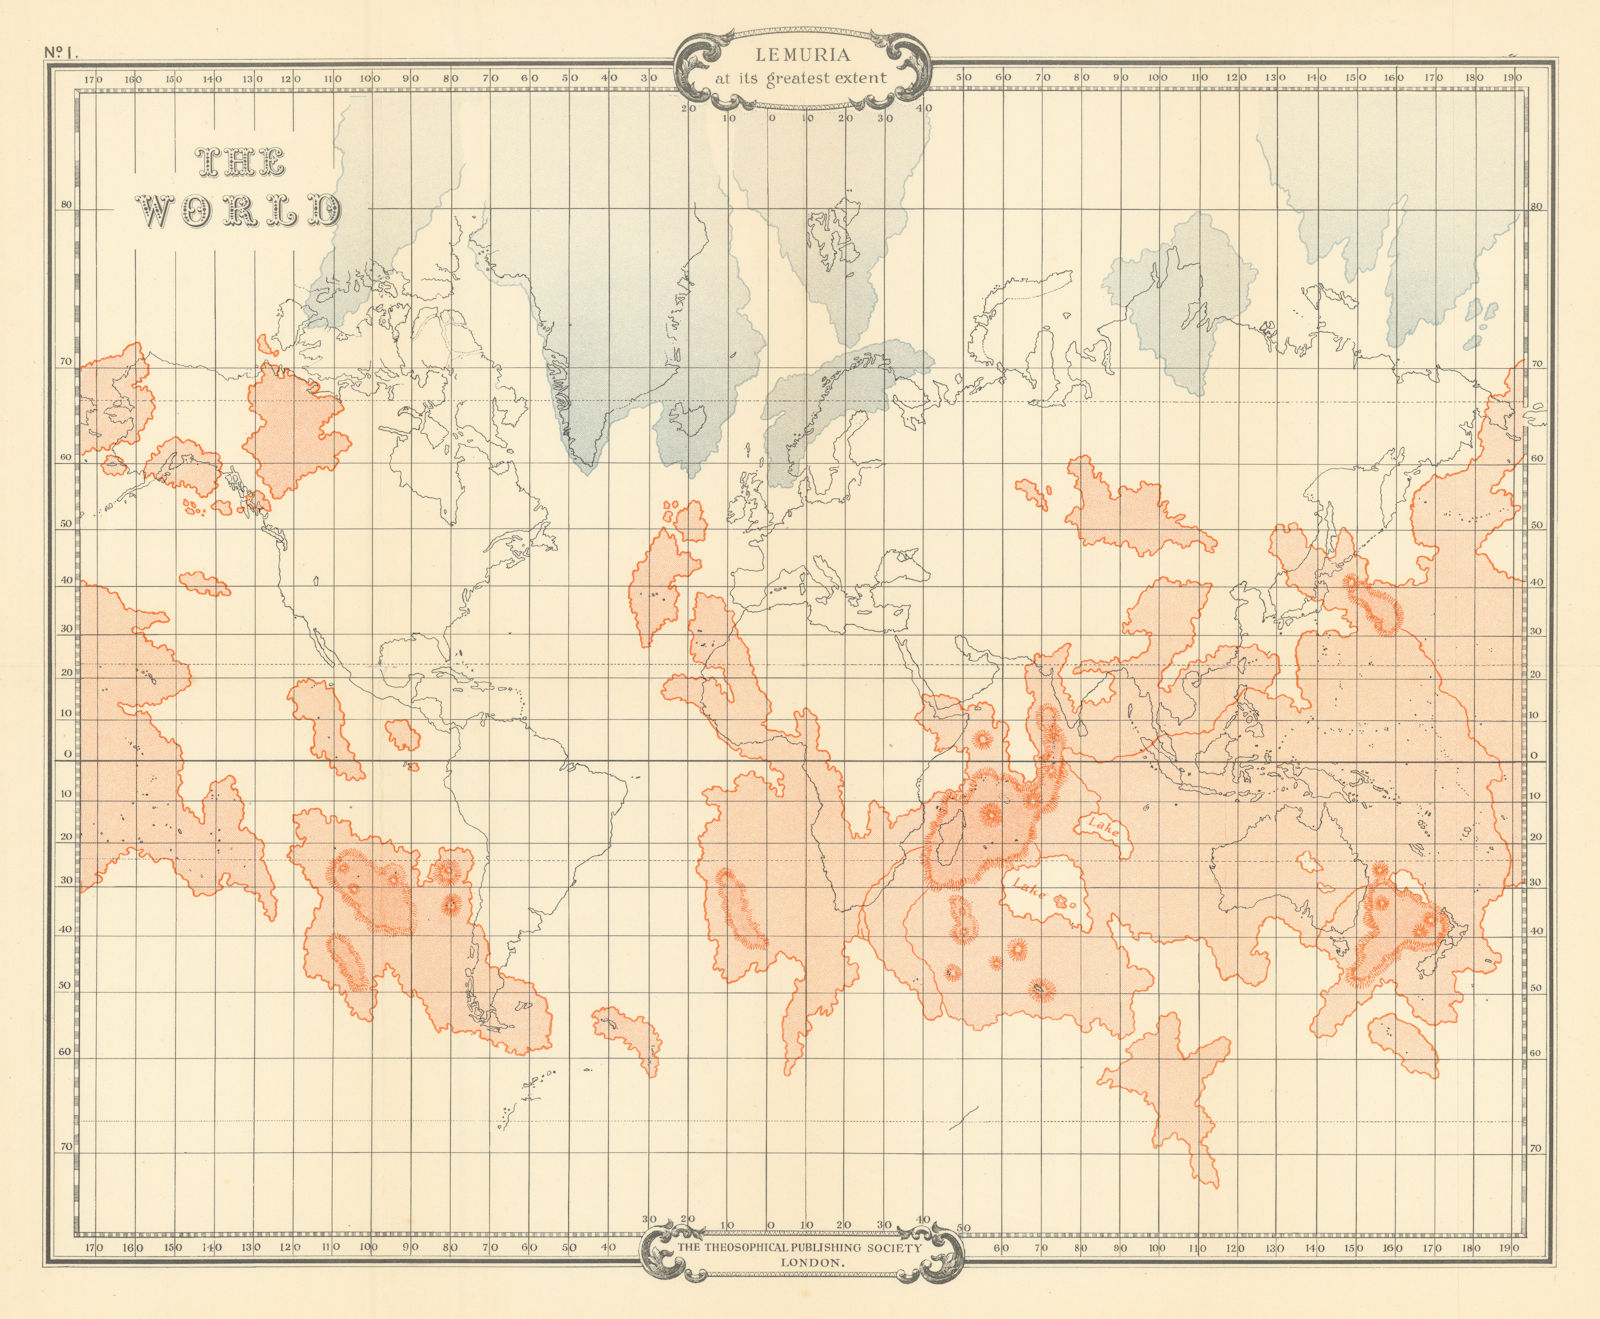 Associate Product The World showing Lemuria at its greatest extent. SCOTT-ELLIOT 1925 old map